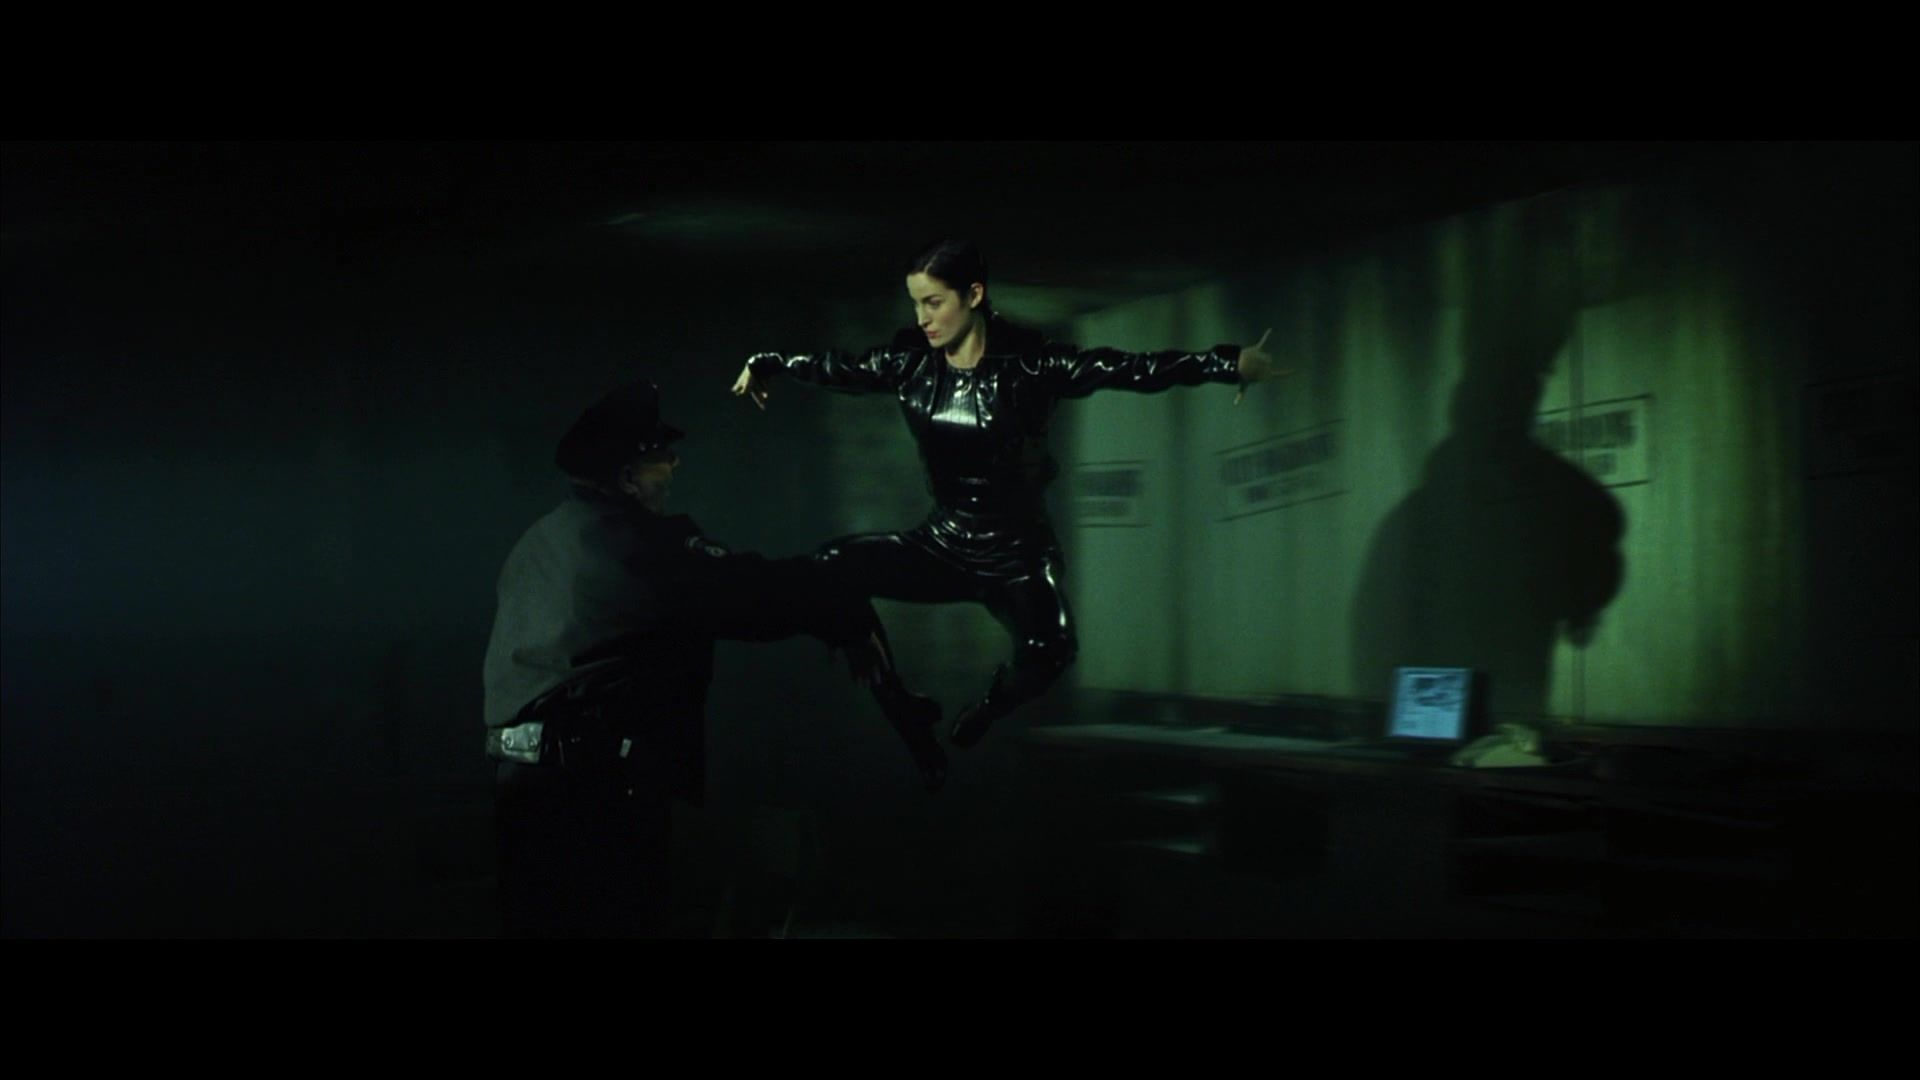 Trinity (Carrie Anne Moss) sits in the dark with her back to the camera.